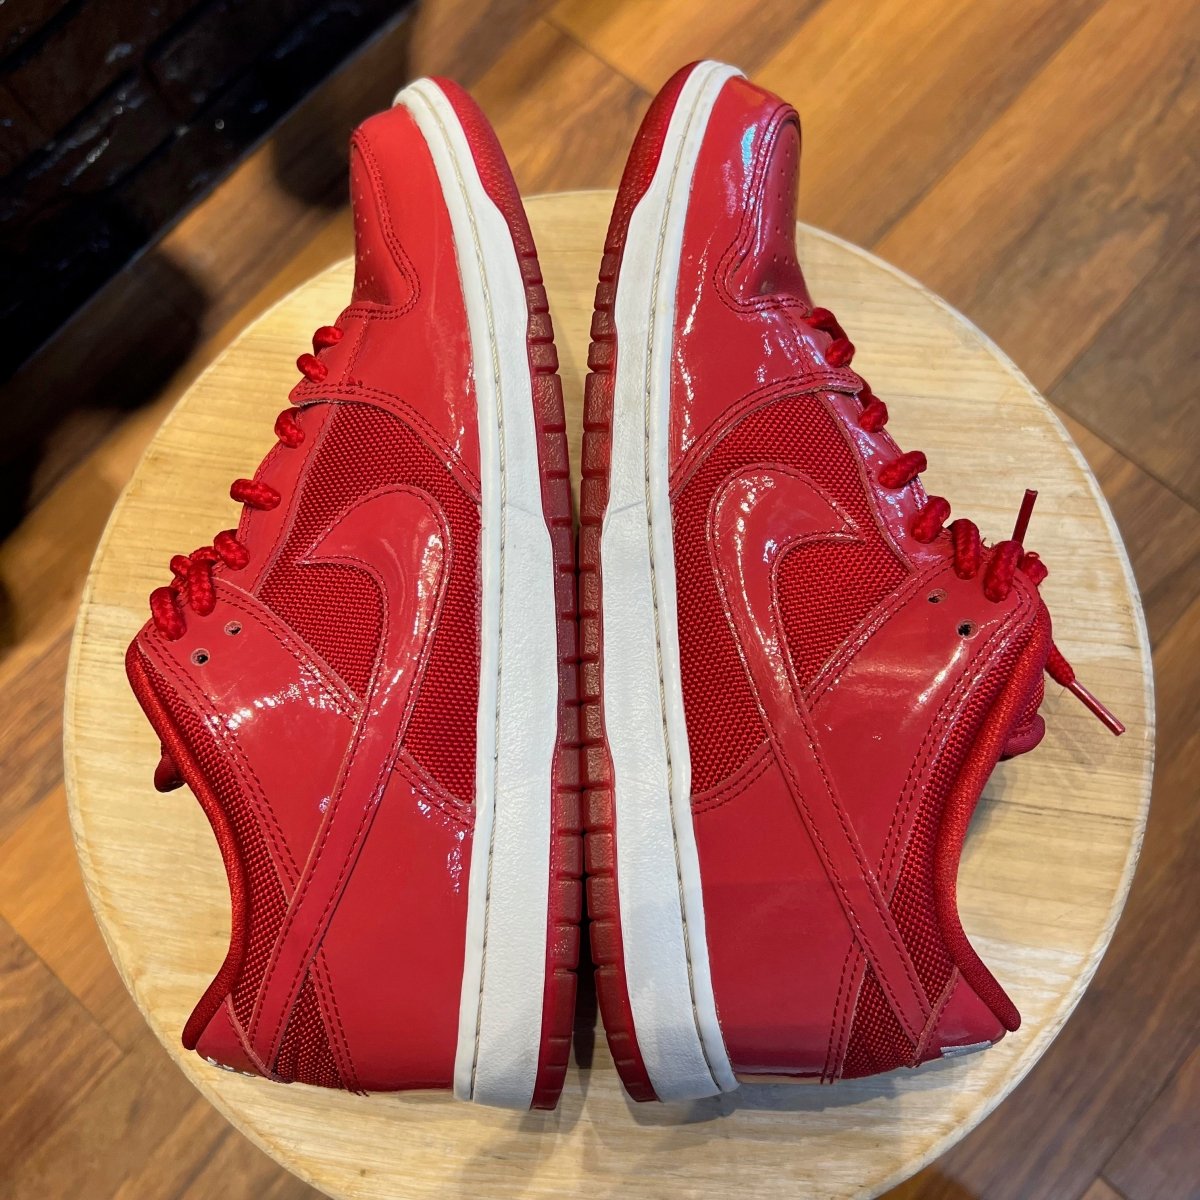 Dunk Low Pro SB 'Red Patent Leather'- Gently Enjoyed (Used) Men 11 - Low Sneaker - Jawns on Fire Sneakers & Streetwear